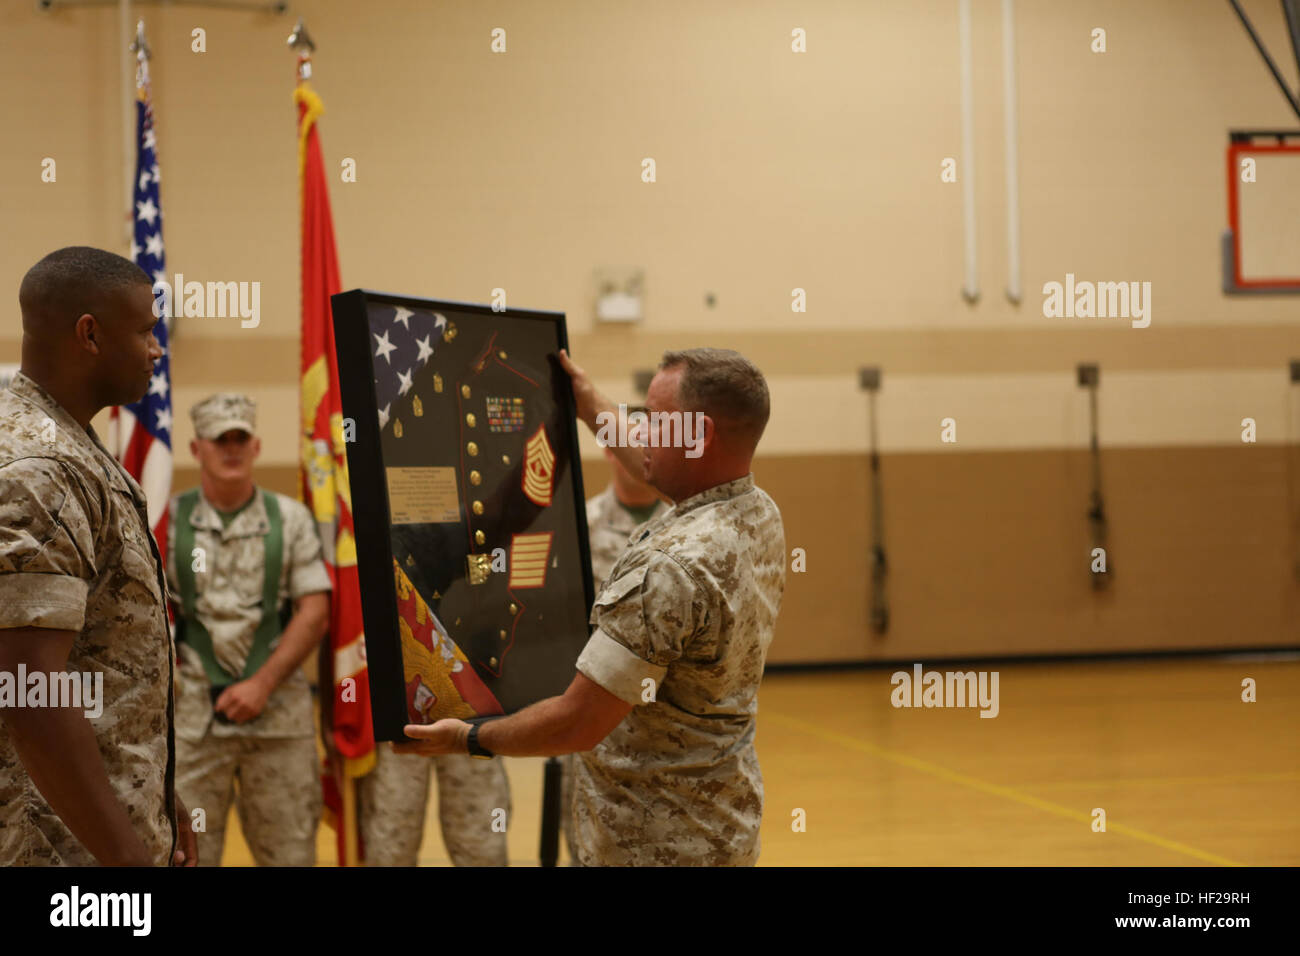 U.S. Marine Corps Master Sgt. Brown with Headquarters and Support Battalion, School of Infantry-East (SOI-E), presents Master Gunnery Sgt. James G. Corwin with a shadow box during his retirement ceremony aboard Camp Geiger, N.C., July, 9, 2014. Marines with SOI-E, along with family and friends, gathered to celebrate Corwin's retirement from the Marine Corps after serving 26 faithful years. (U.S. Marine Corps photo by Cpl. Maricela Meza/Released) MGySgt Corwin retirement 140709-M-AX605-099 Stock Photo